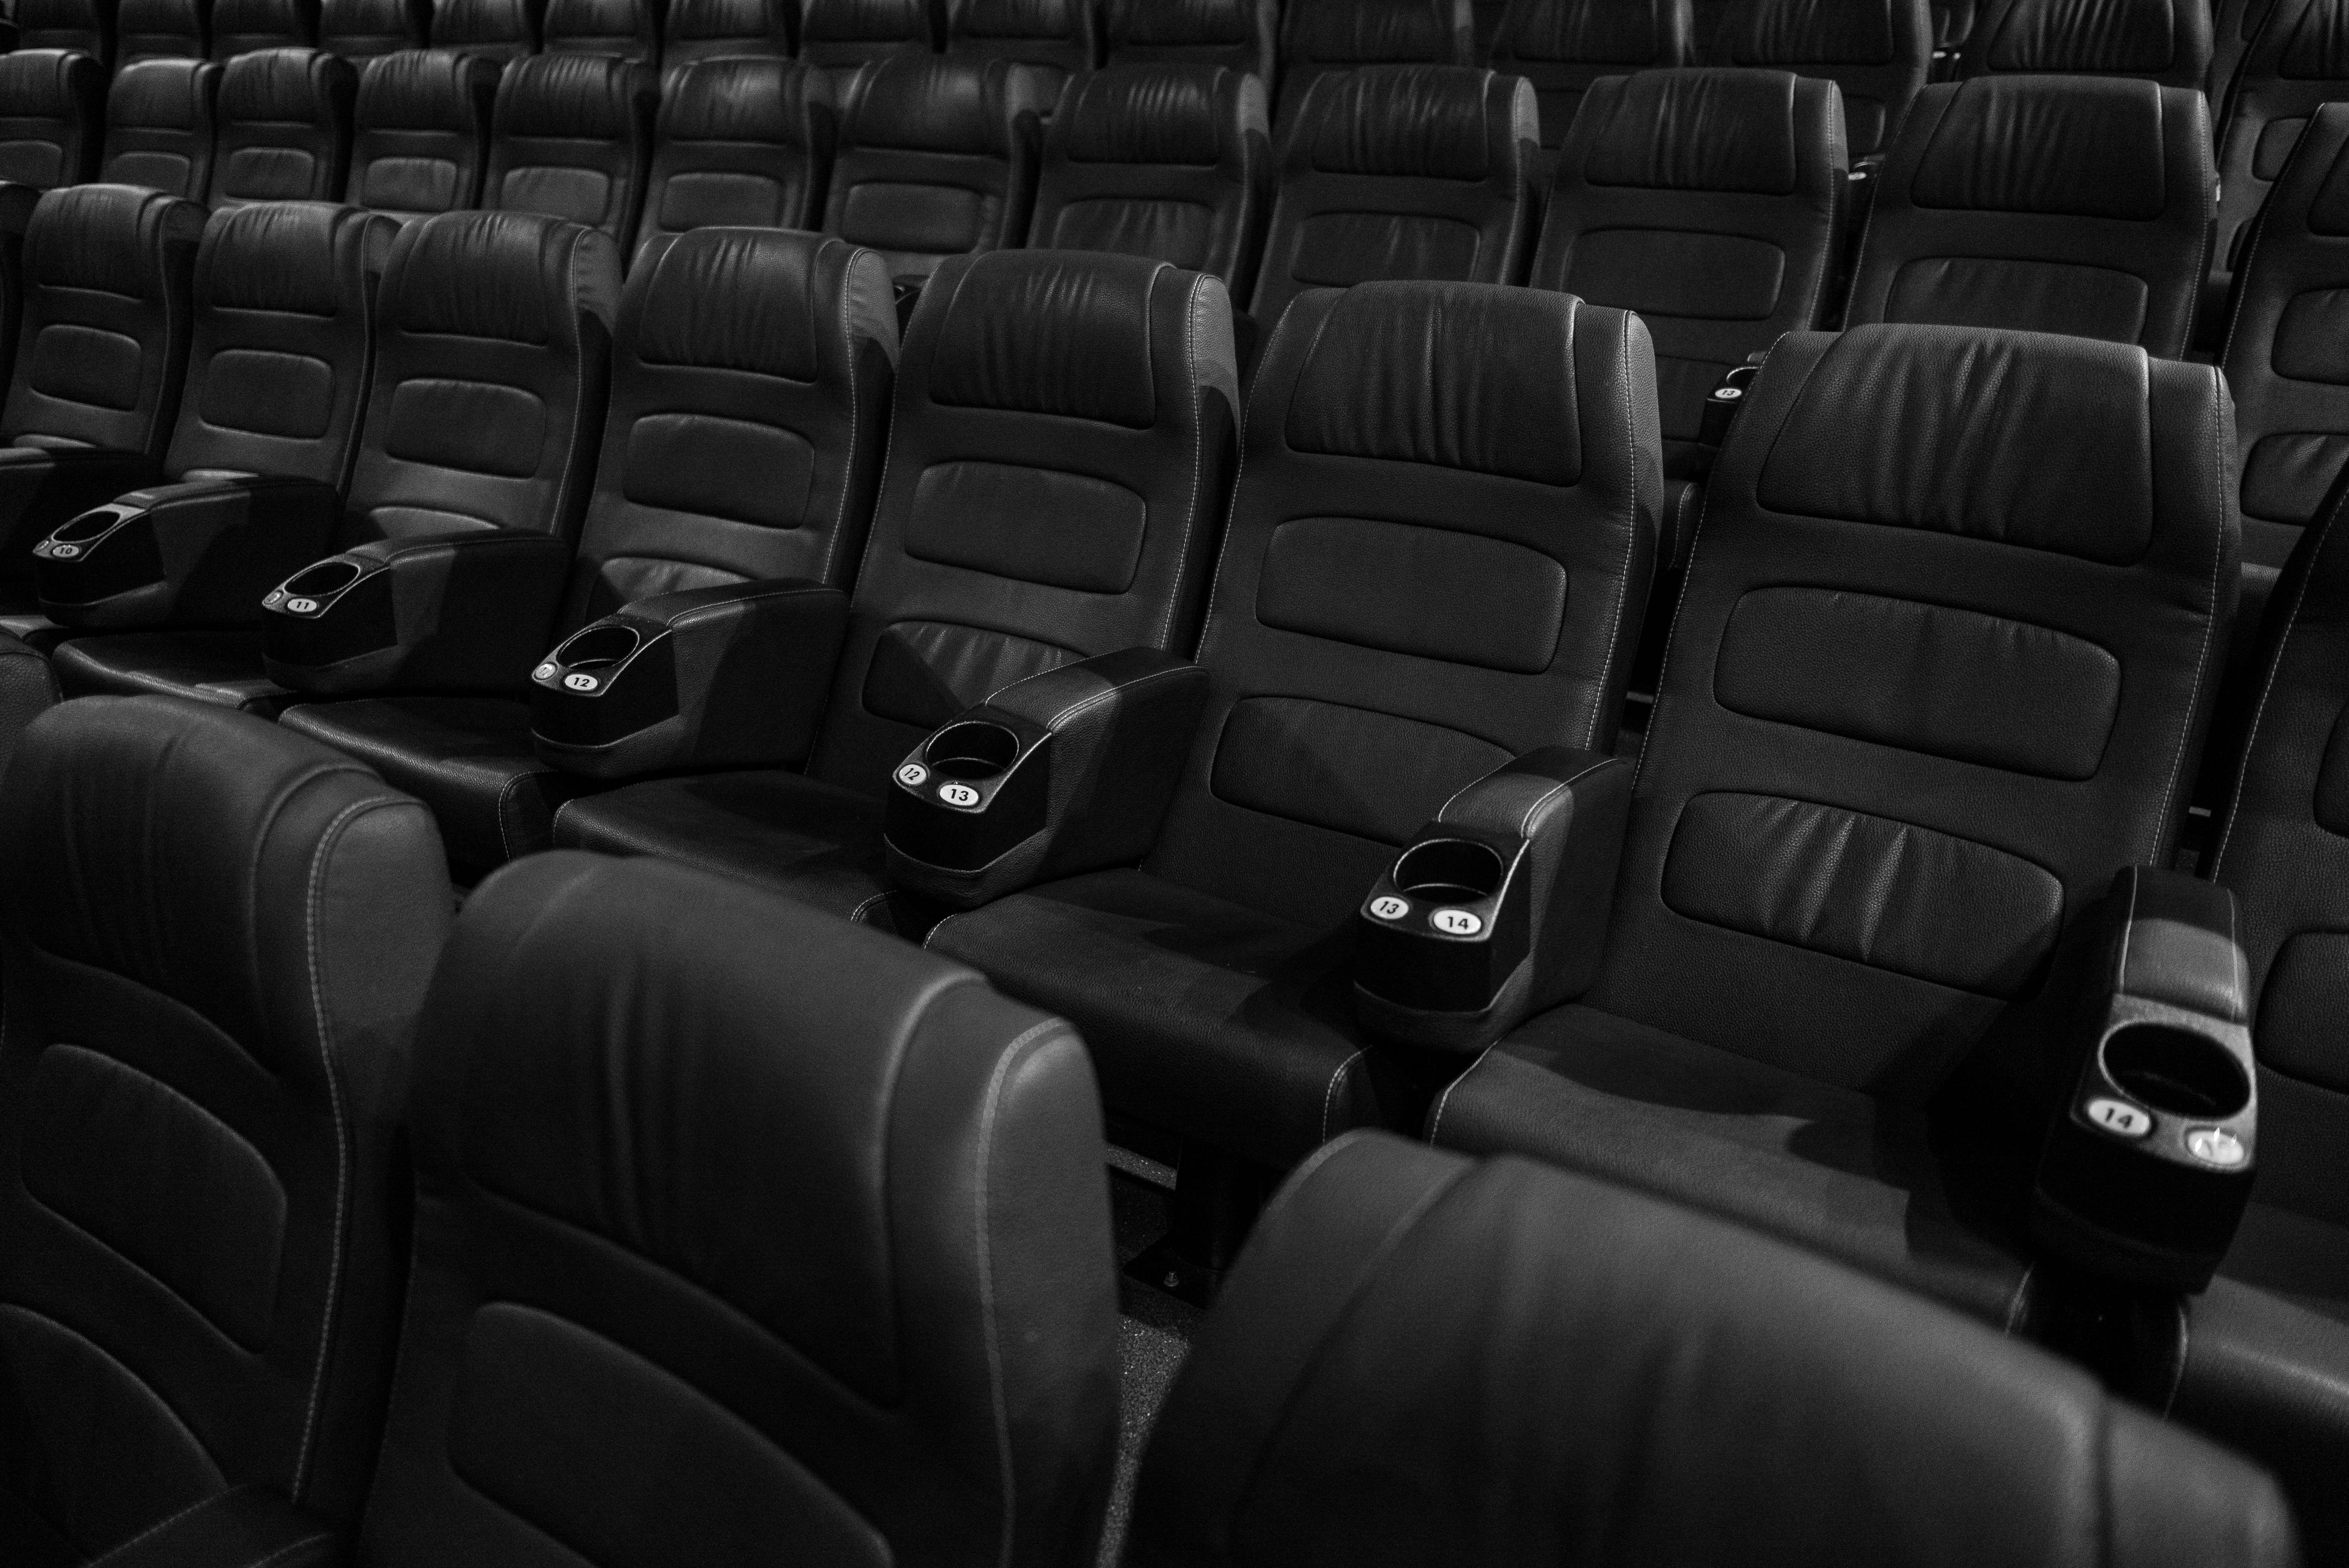 grayscale photo of empty seats in movie theater